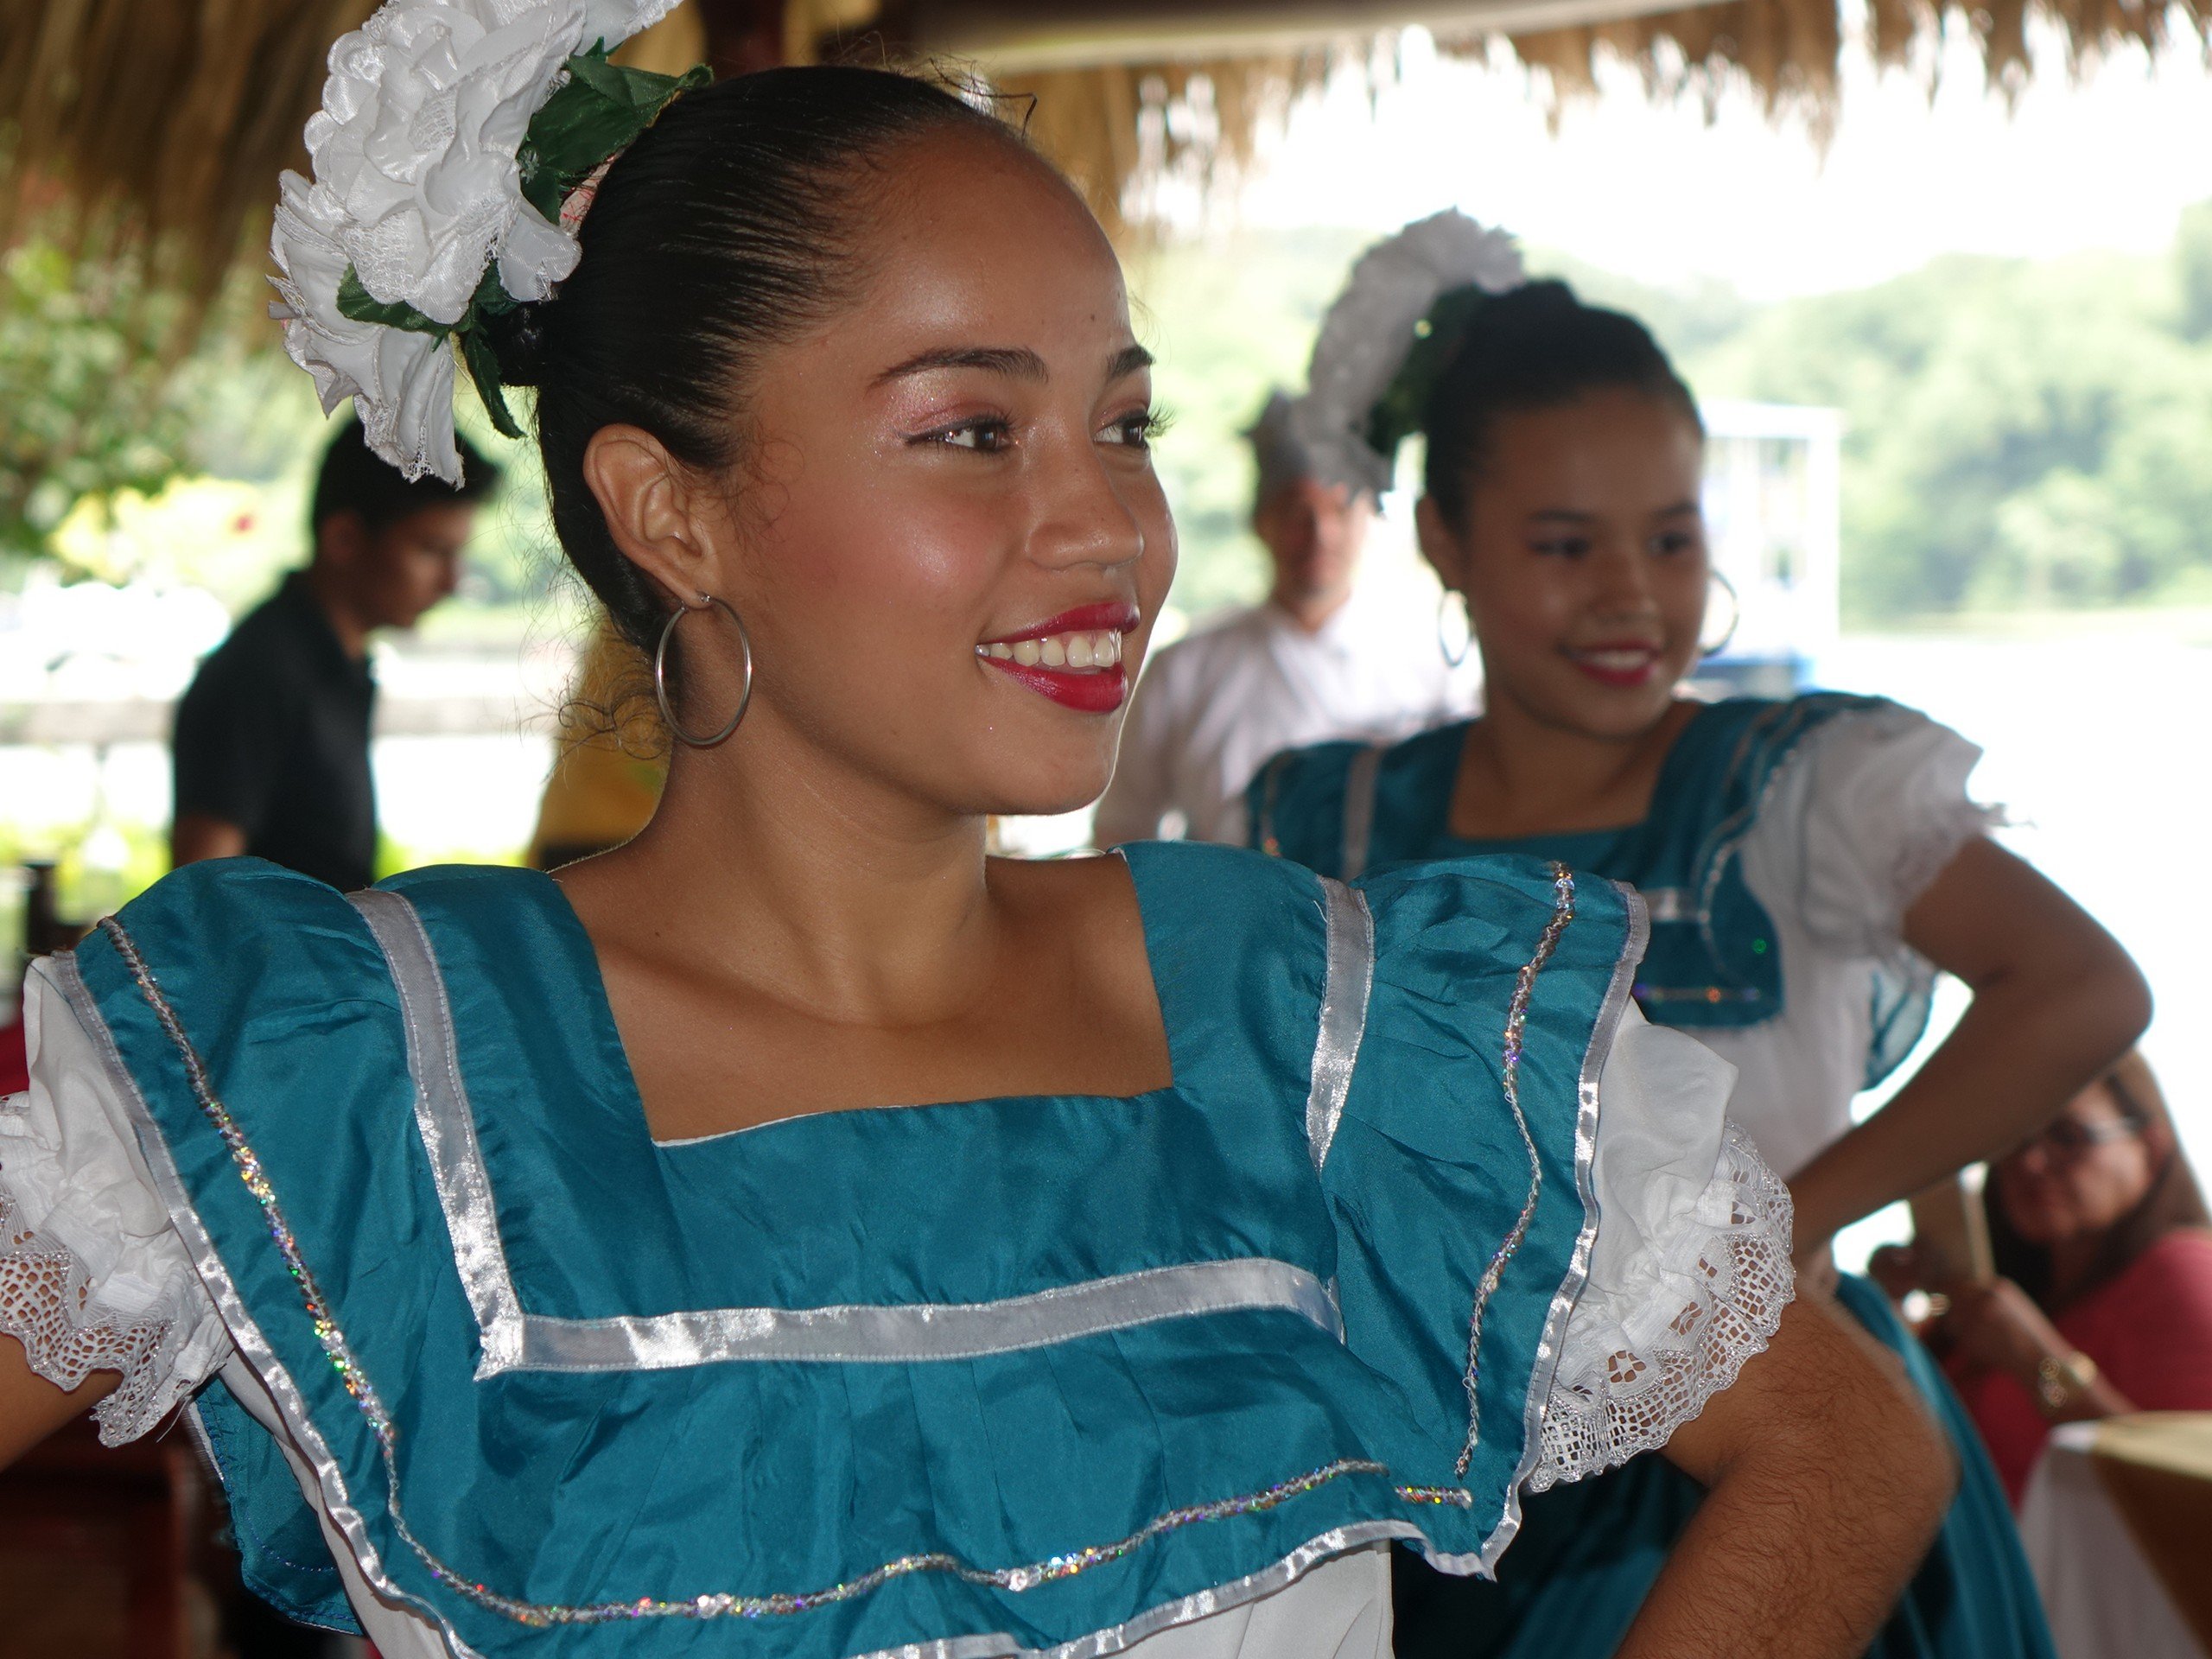 Typical Dance in Nicaragua